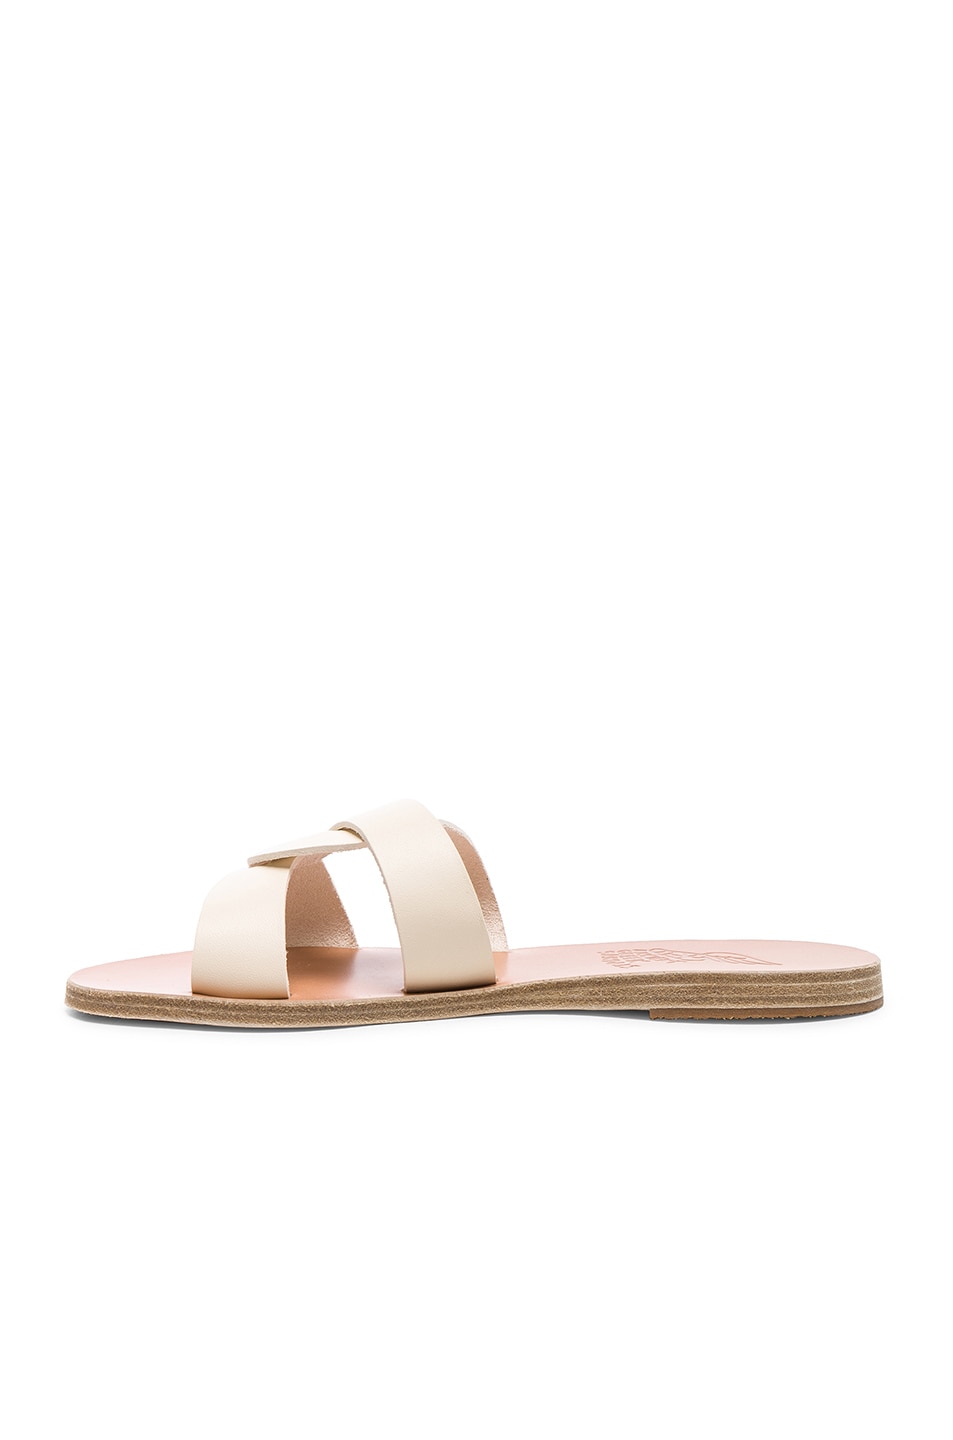 Ancient Greek Sandals Leather Desmos Sandals in Off White | FWRD